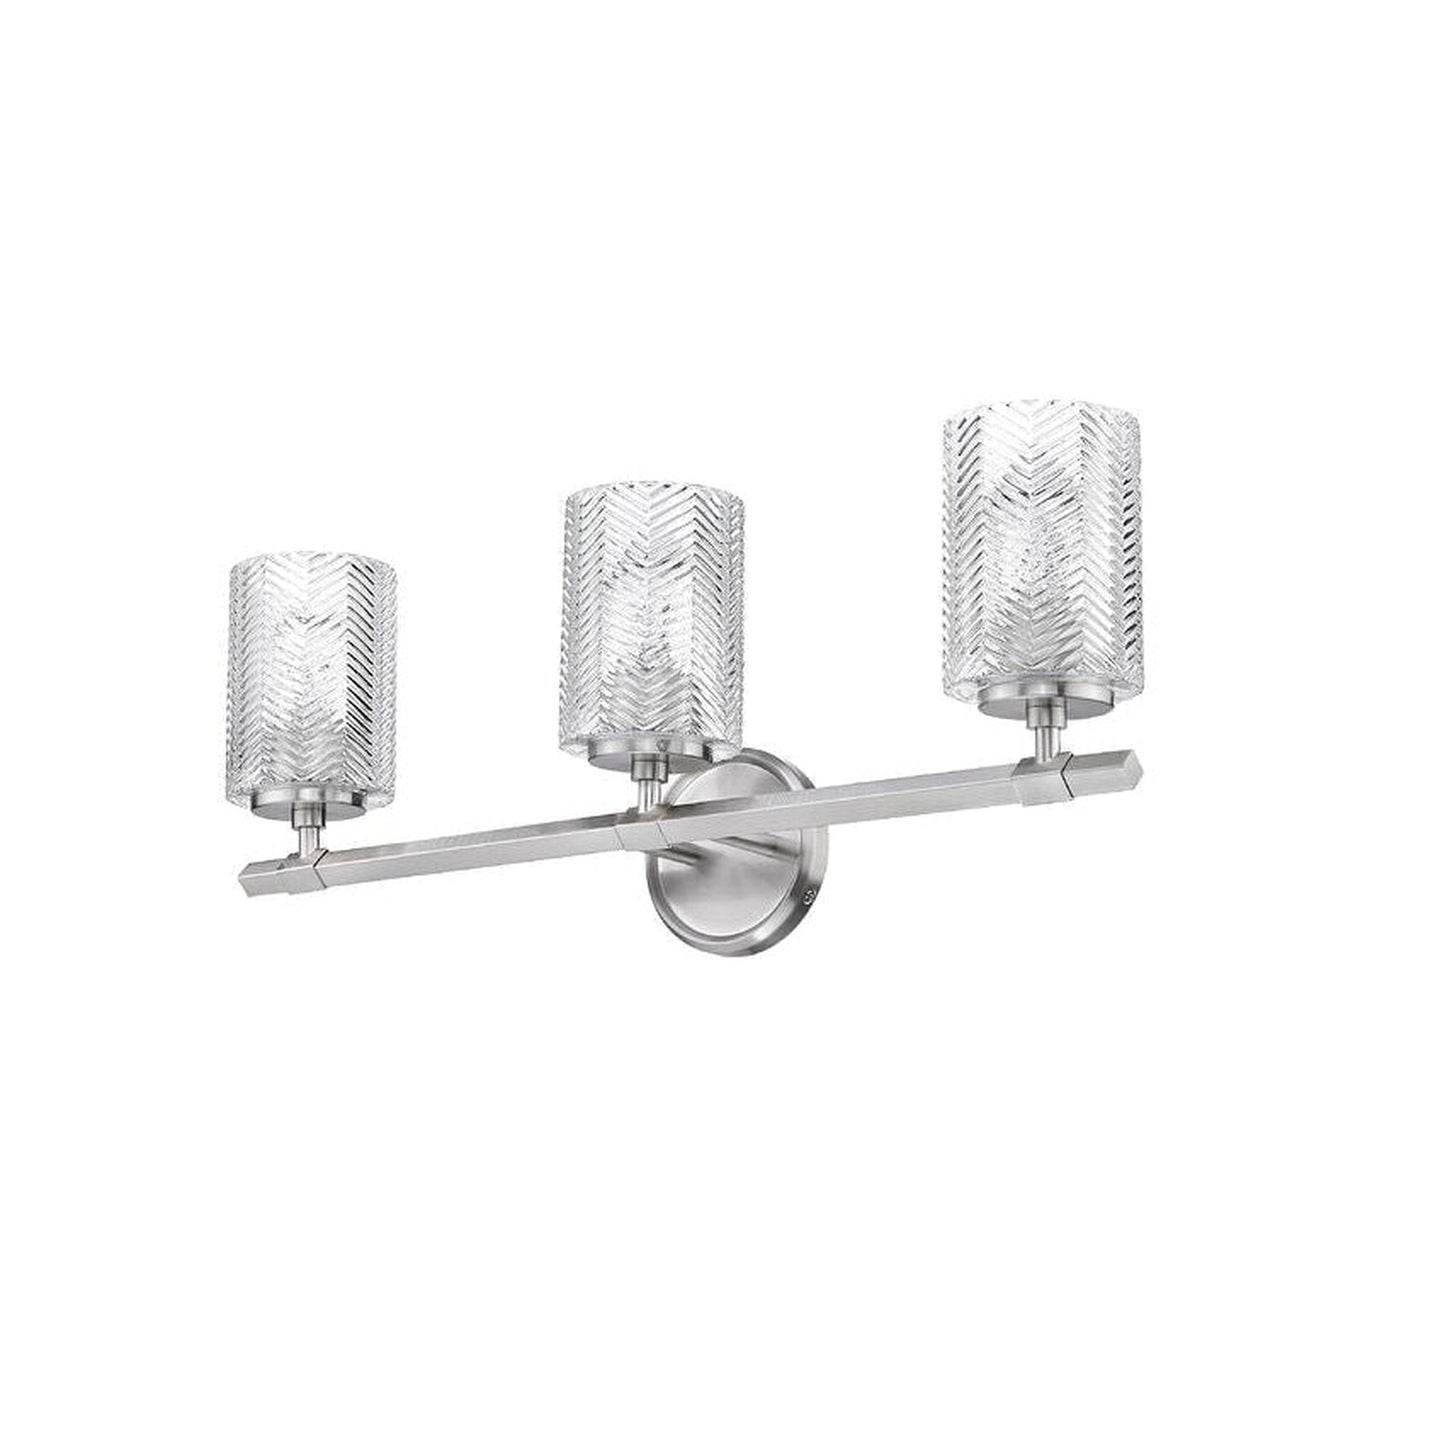 Z-Lite Dover Street 25" 3-Light Brushed Nickel Vanity Light With Clear Glass Shade